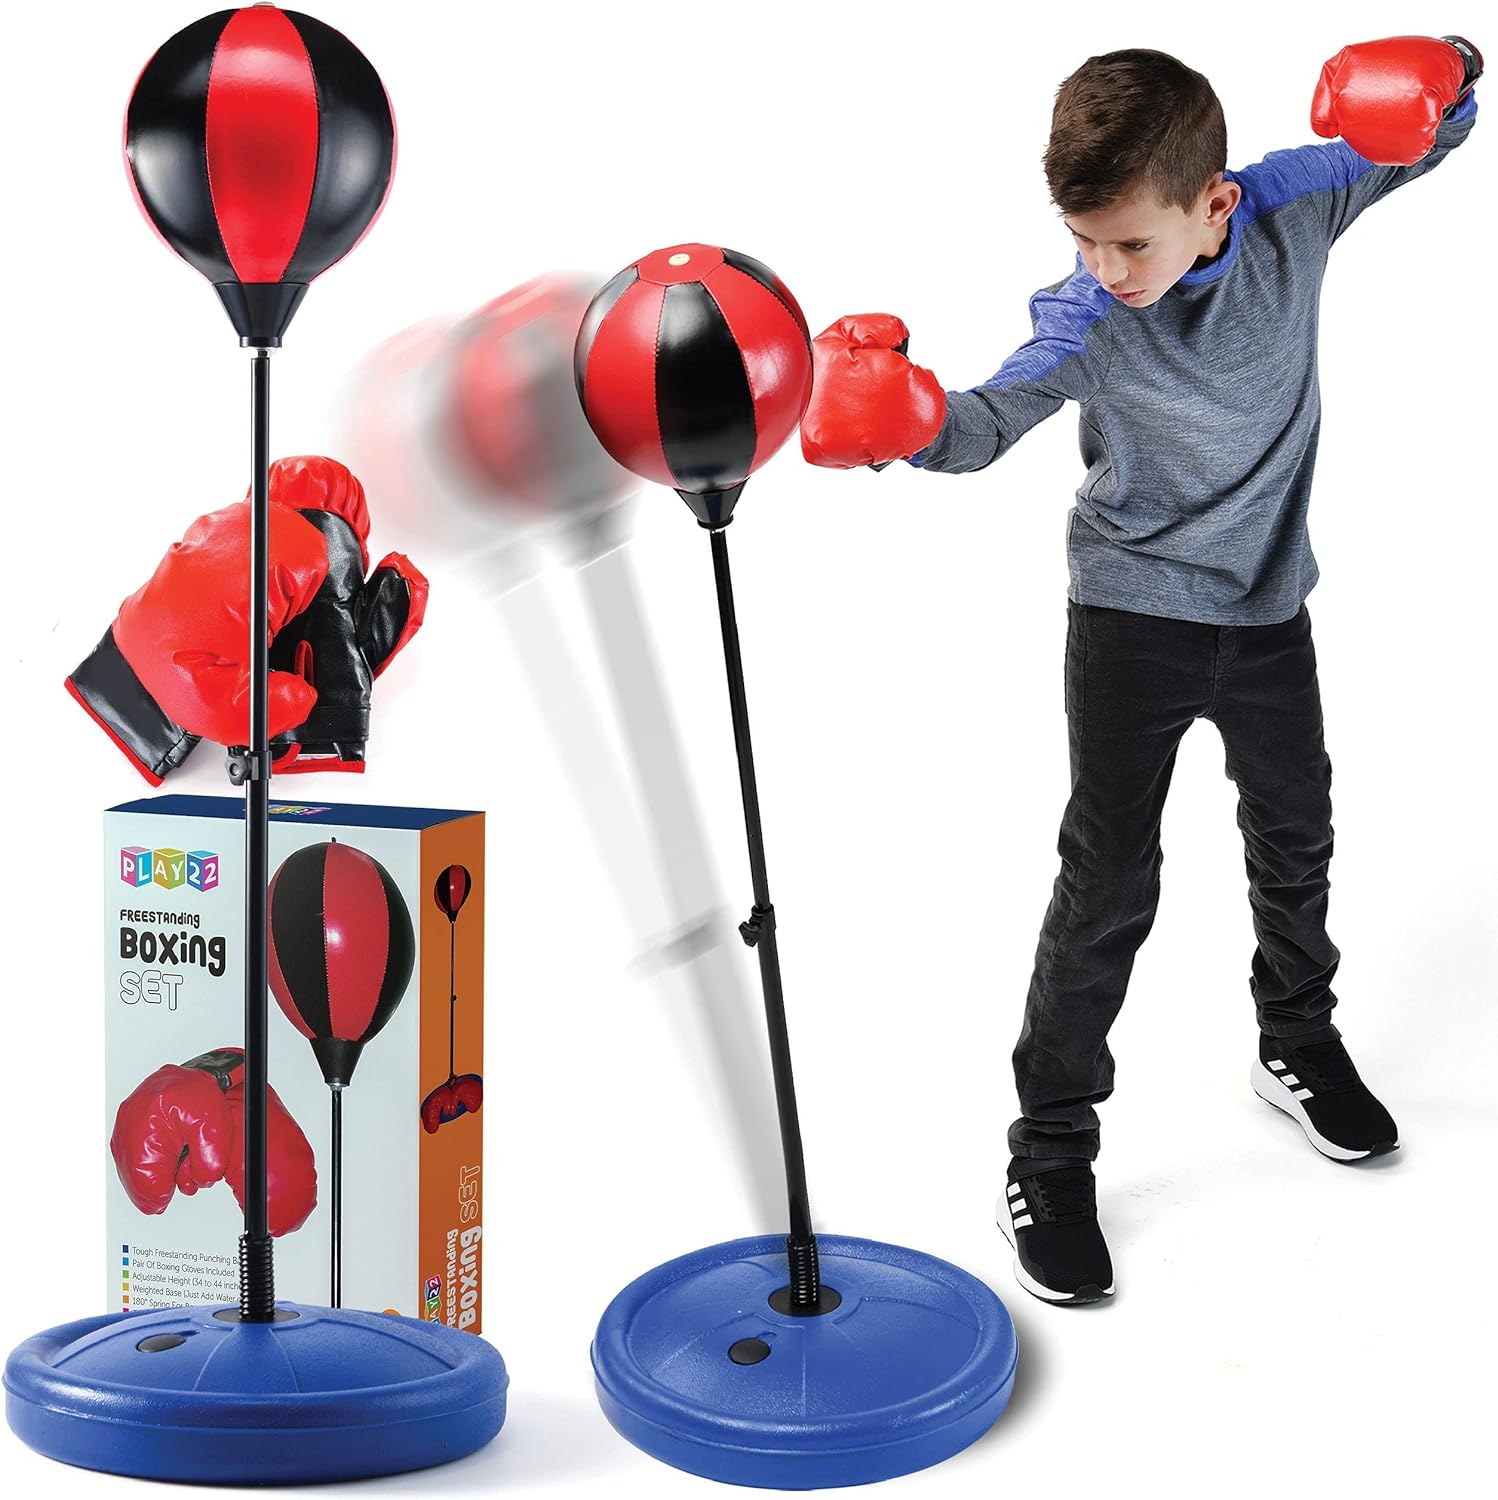 Kids Freestanding Punching Bag Ball Boxing Set with Gloves NEW 